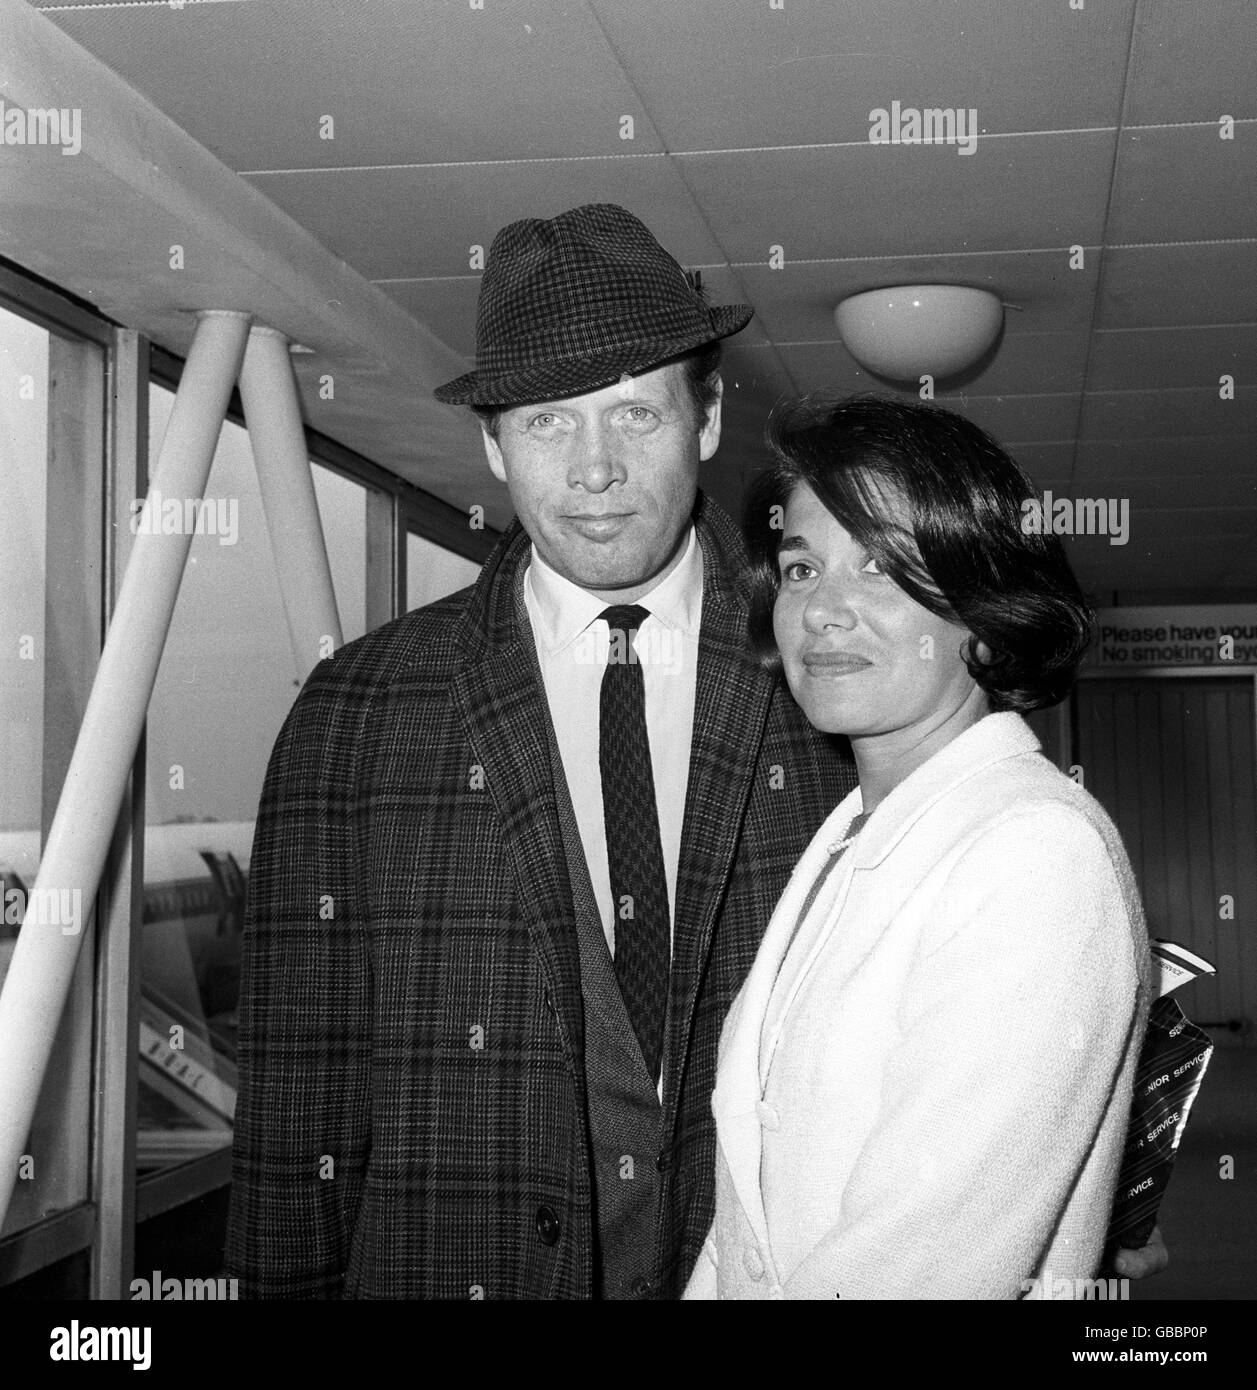 Actor Patrick McGoohan, better known to television viewers as John Drake of the 'Danger Man' series, pictured with wife on returning from a visit to America, at Heathrow Airport. Stock Photo